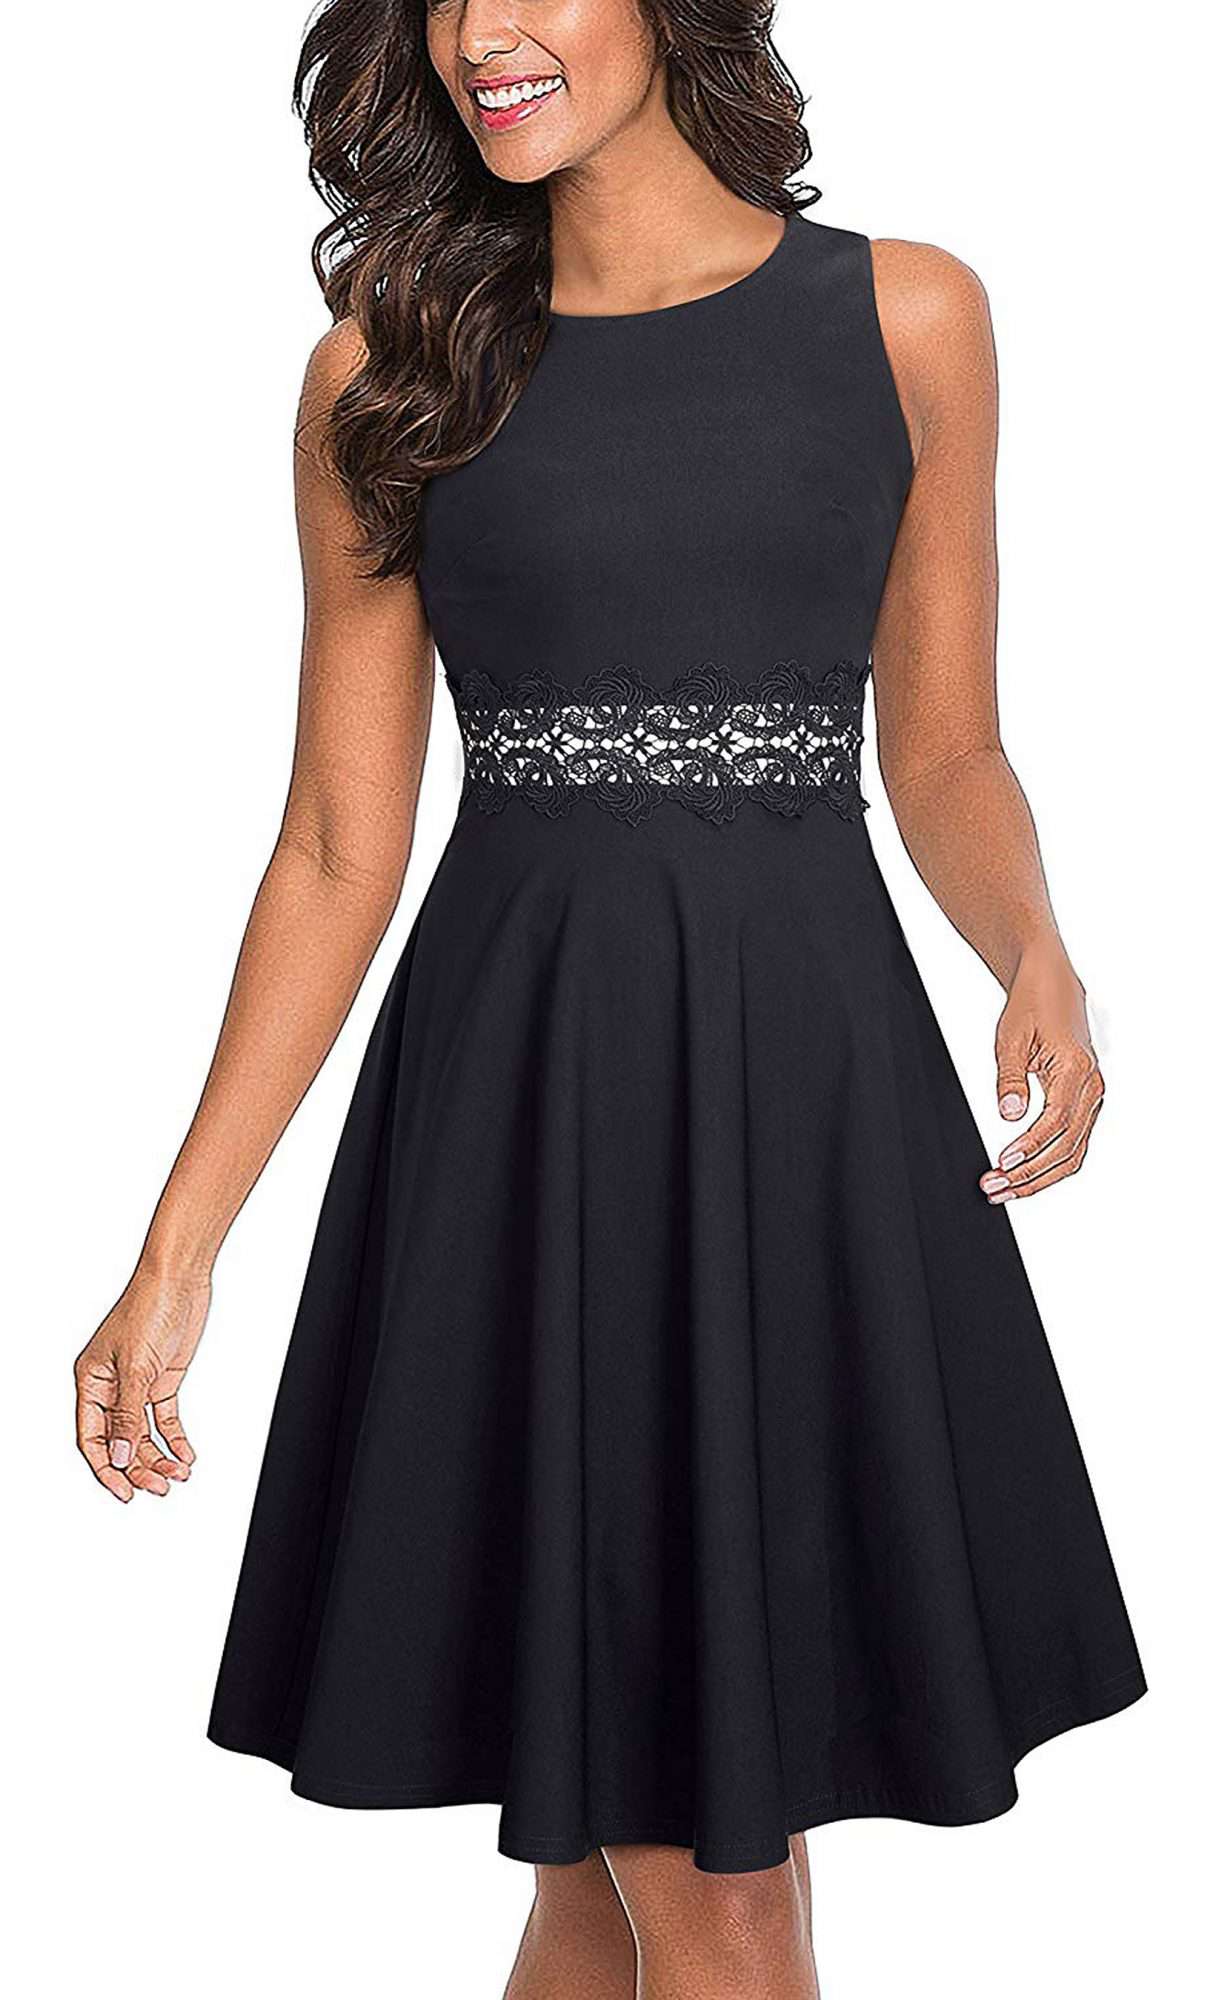 Black Dresses Under $30 No One Will Guess Are From Amazon | PEOPLE.com